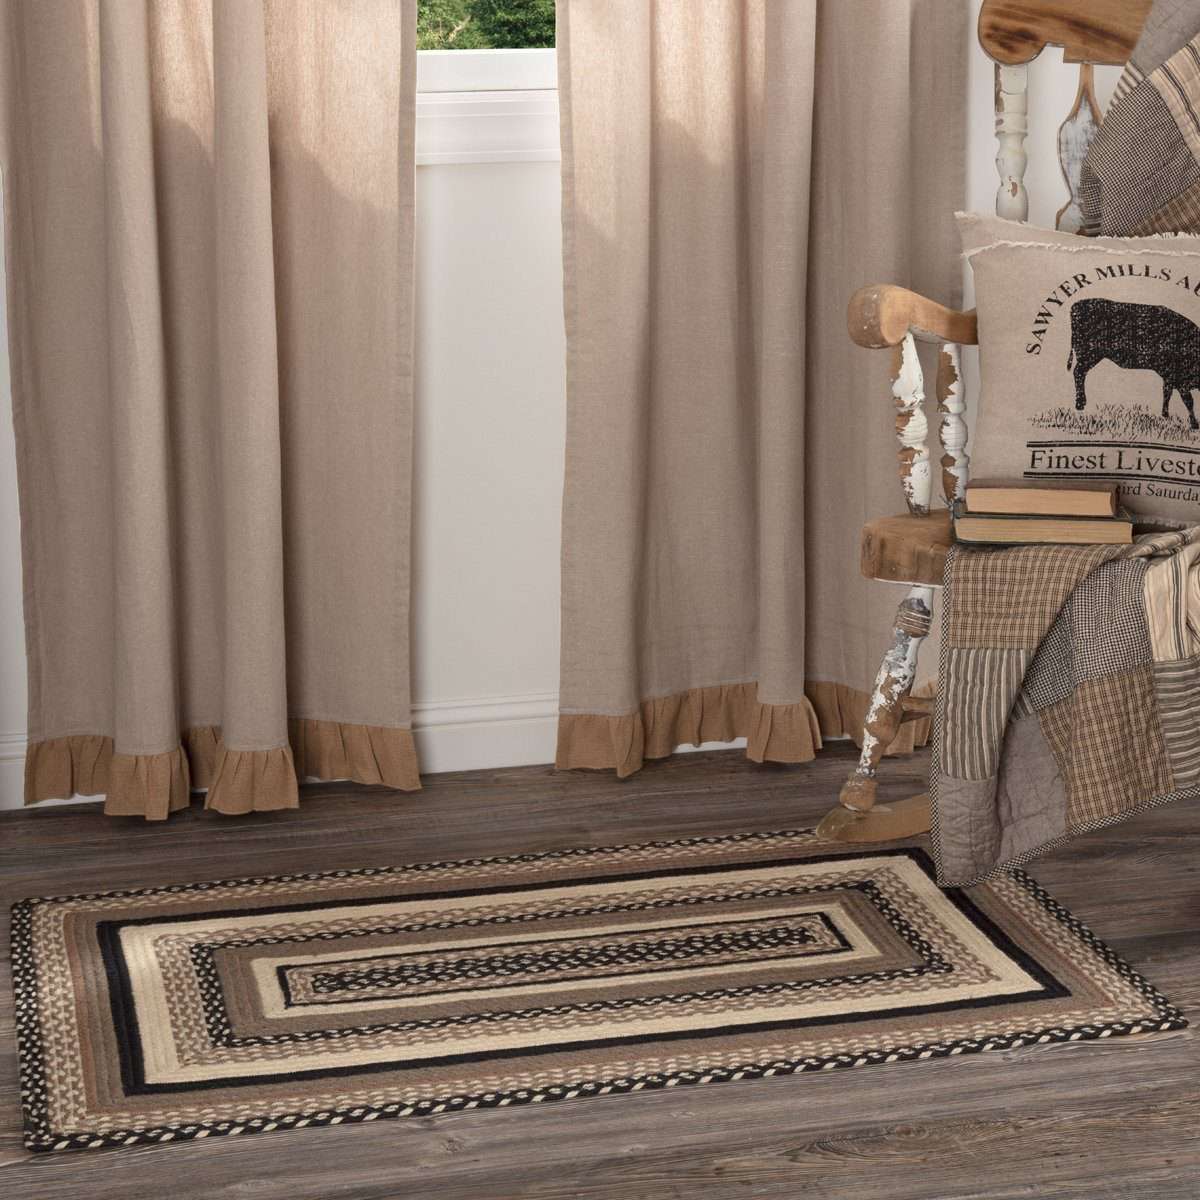 Sawyer Mill Charcoal Jute Braided Rectangle Rugs VHC Brands Rugs VHC Brands 3'x5' 